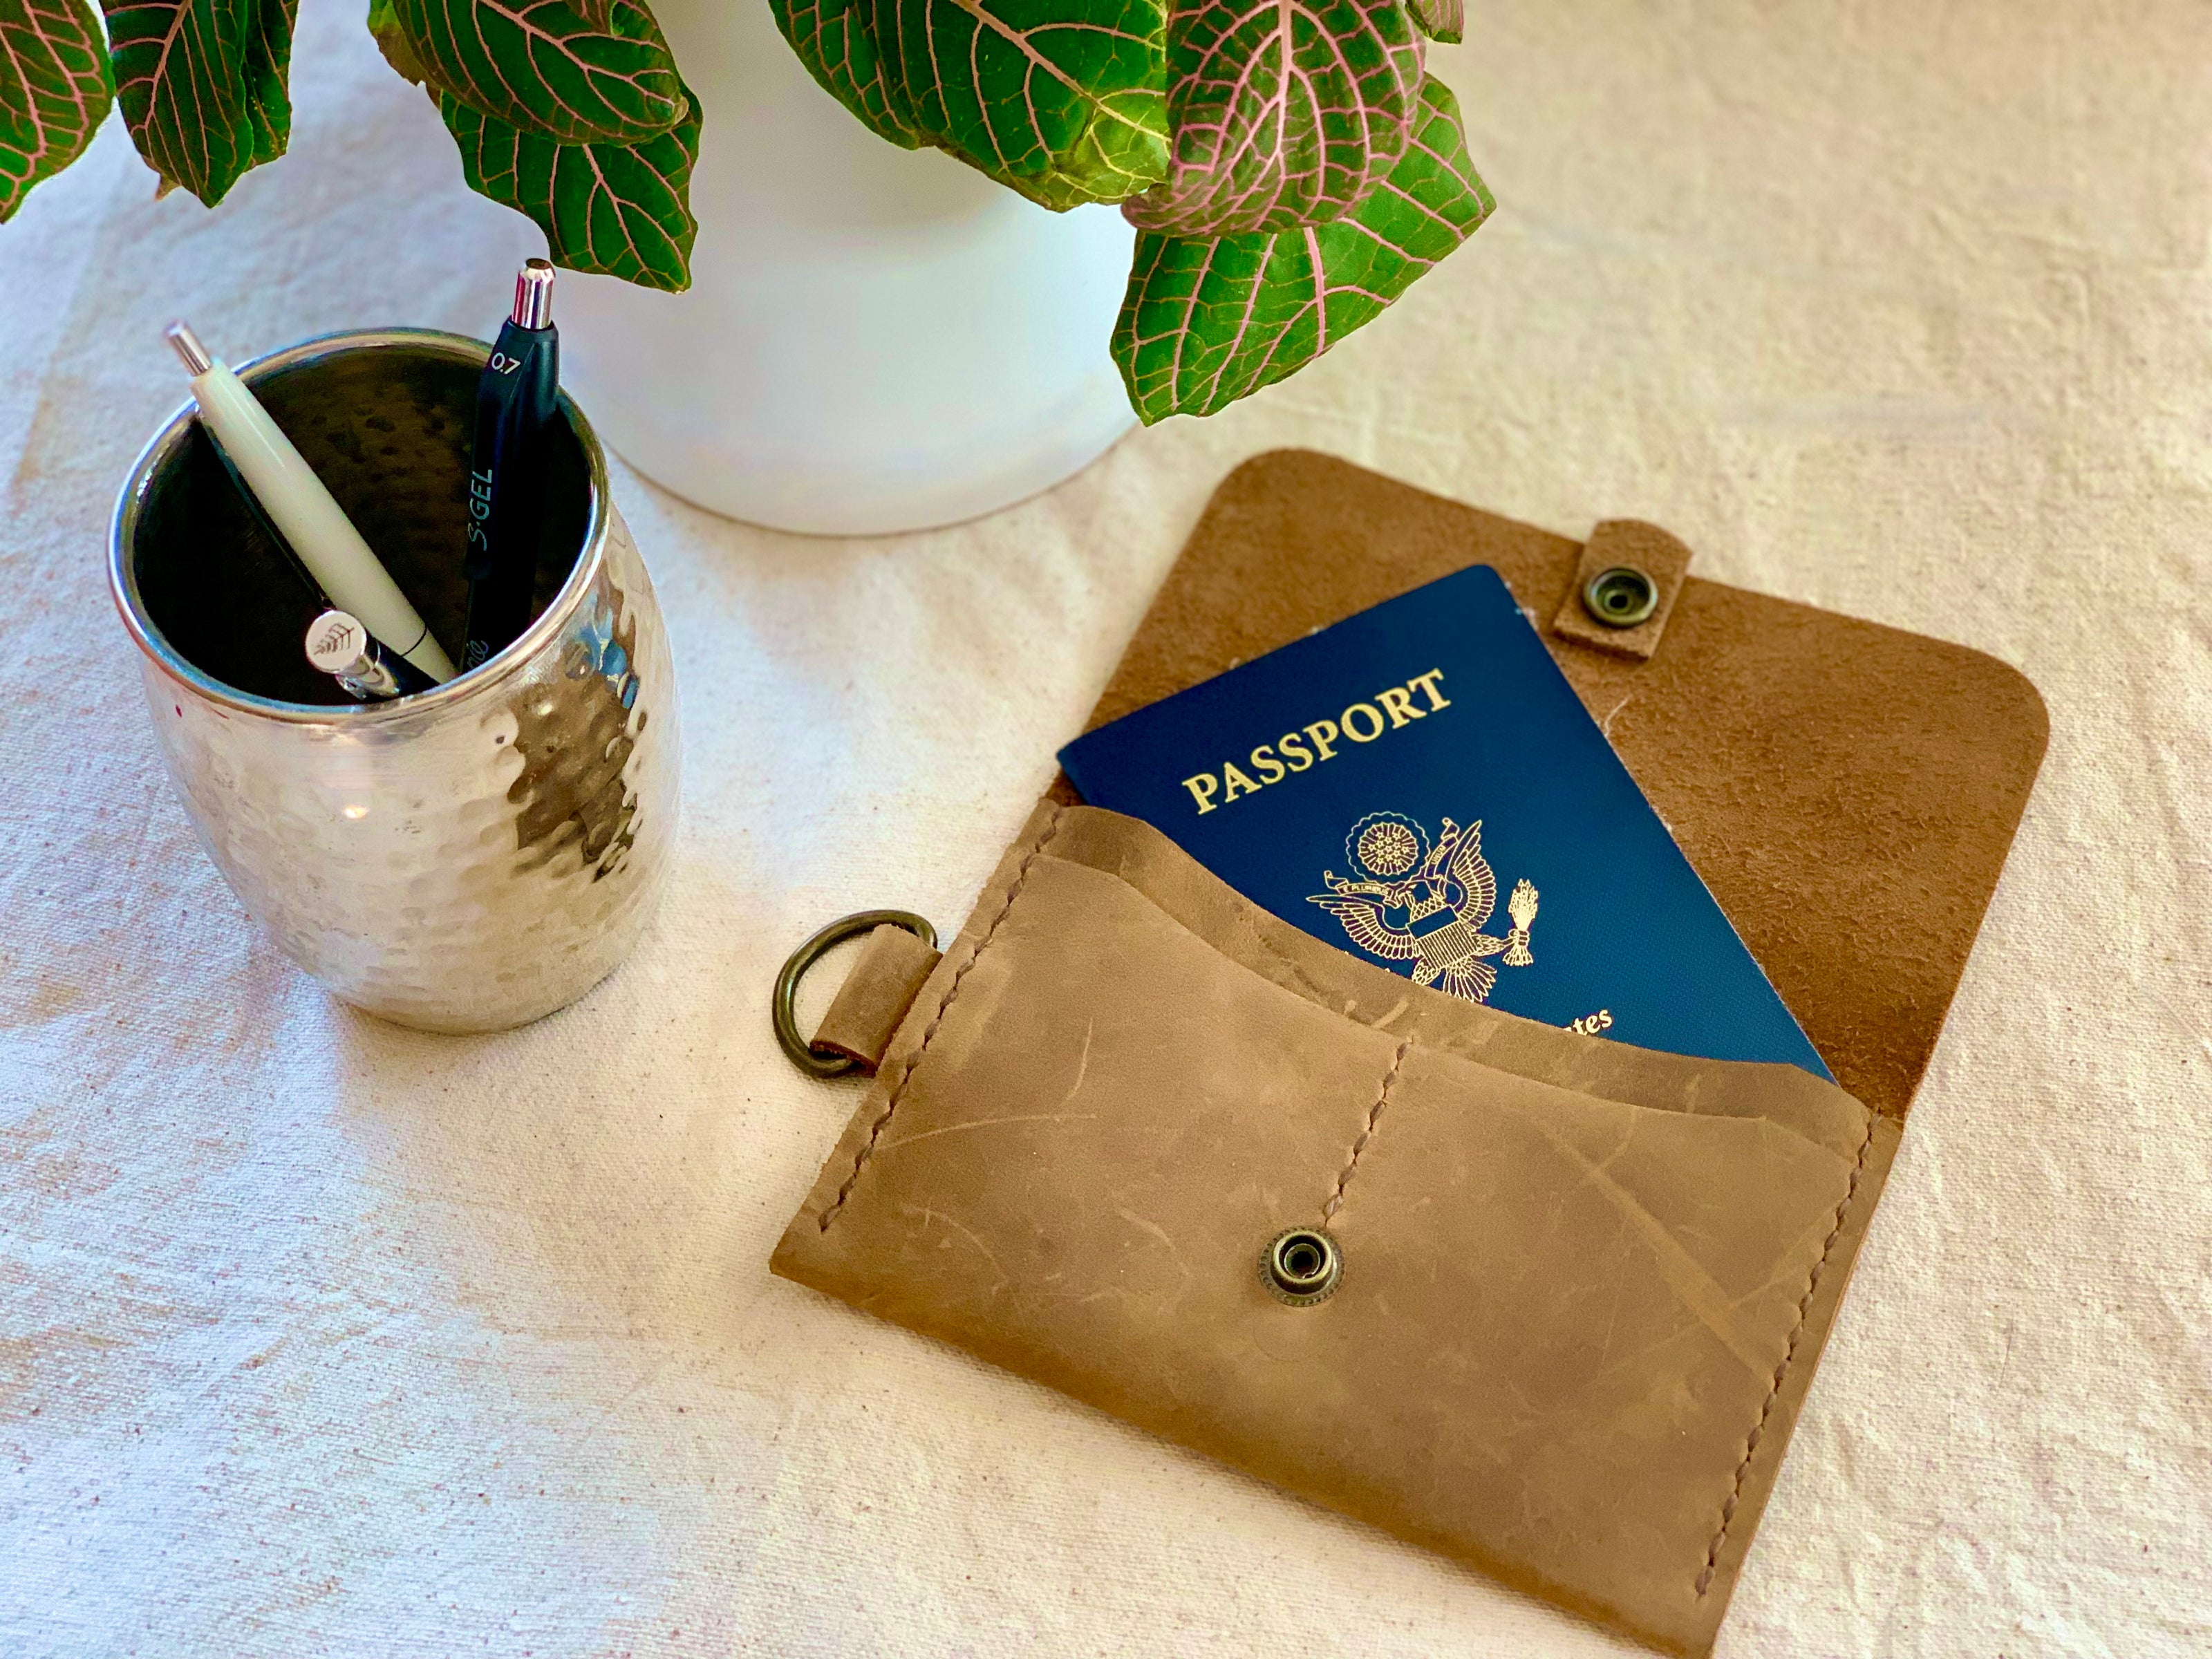 Tvakh Leather Passport Holder with snap clasp to secure your valuables and key ring to attach it to your person securely. 